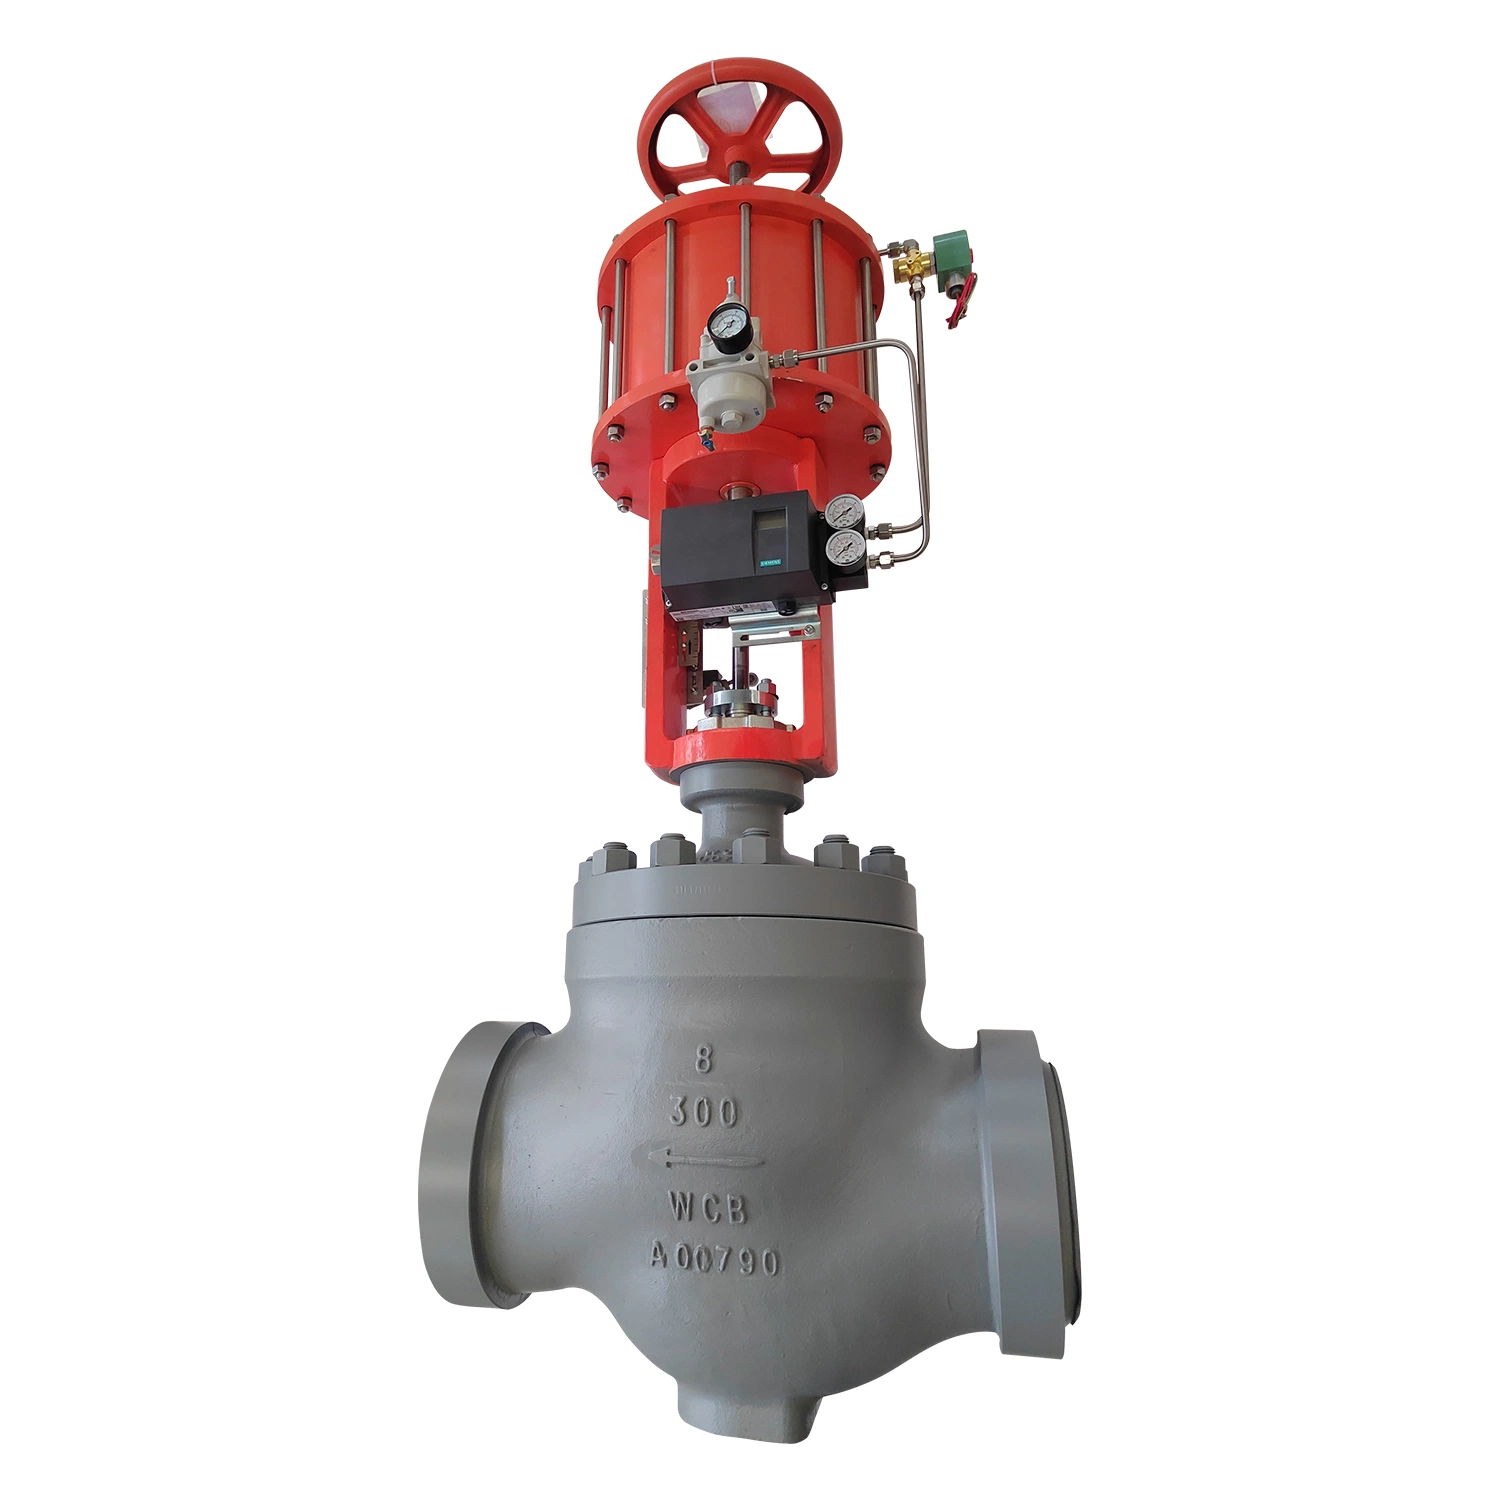 Premium Steam Power Control Valve Products at Competitive Prices